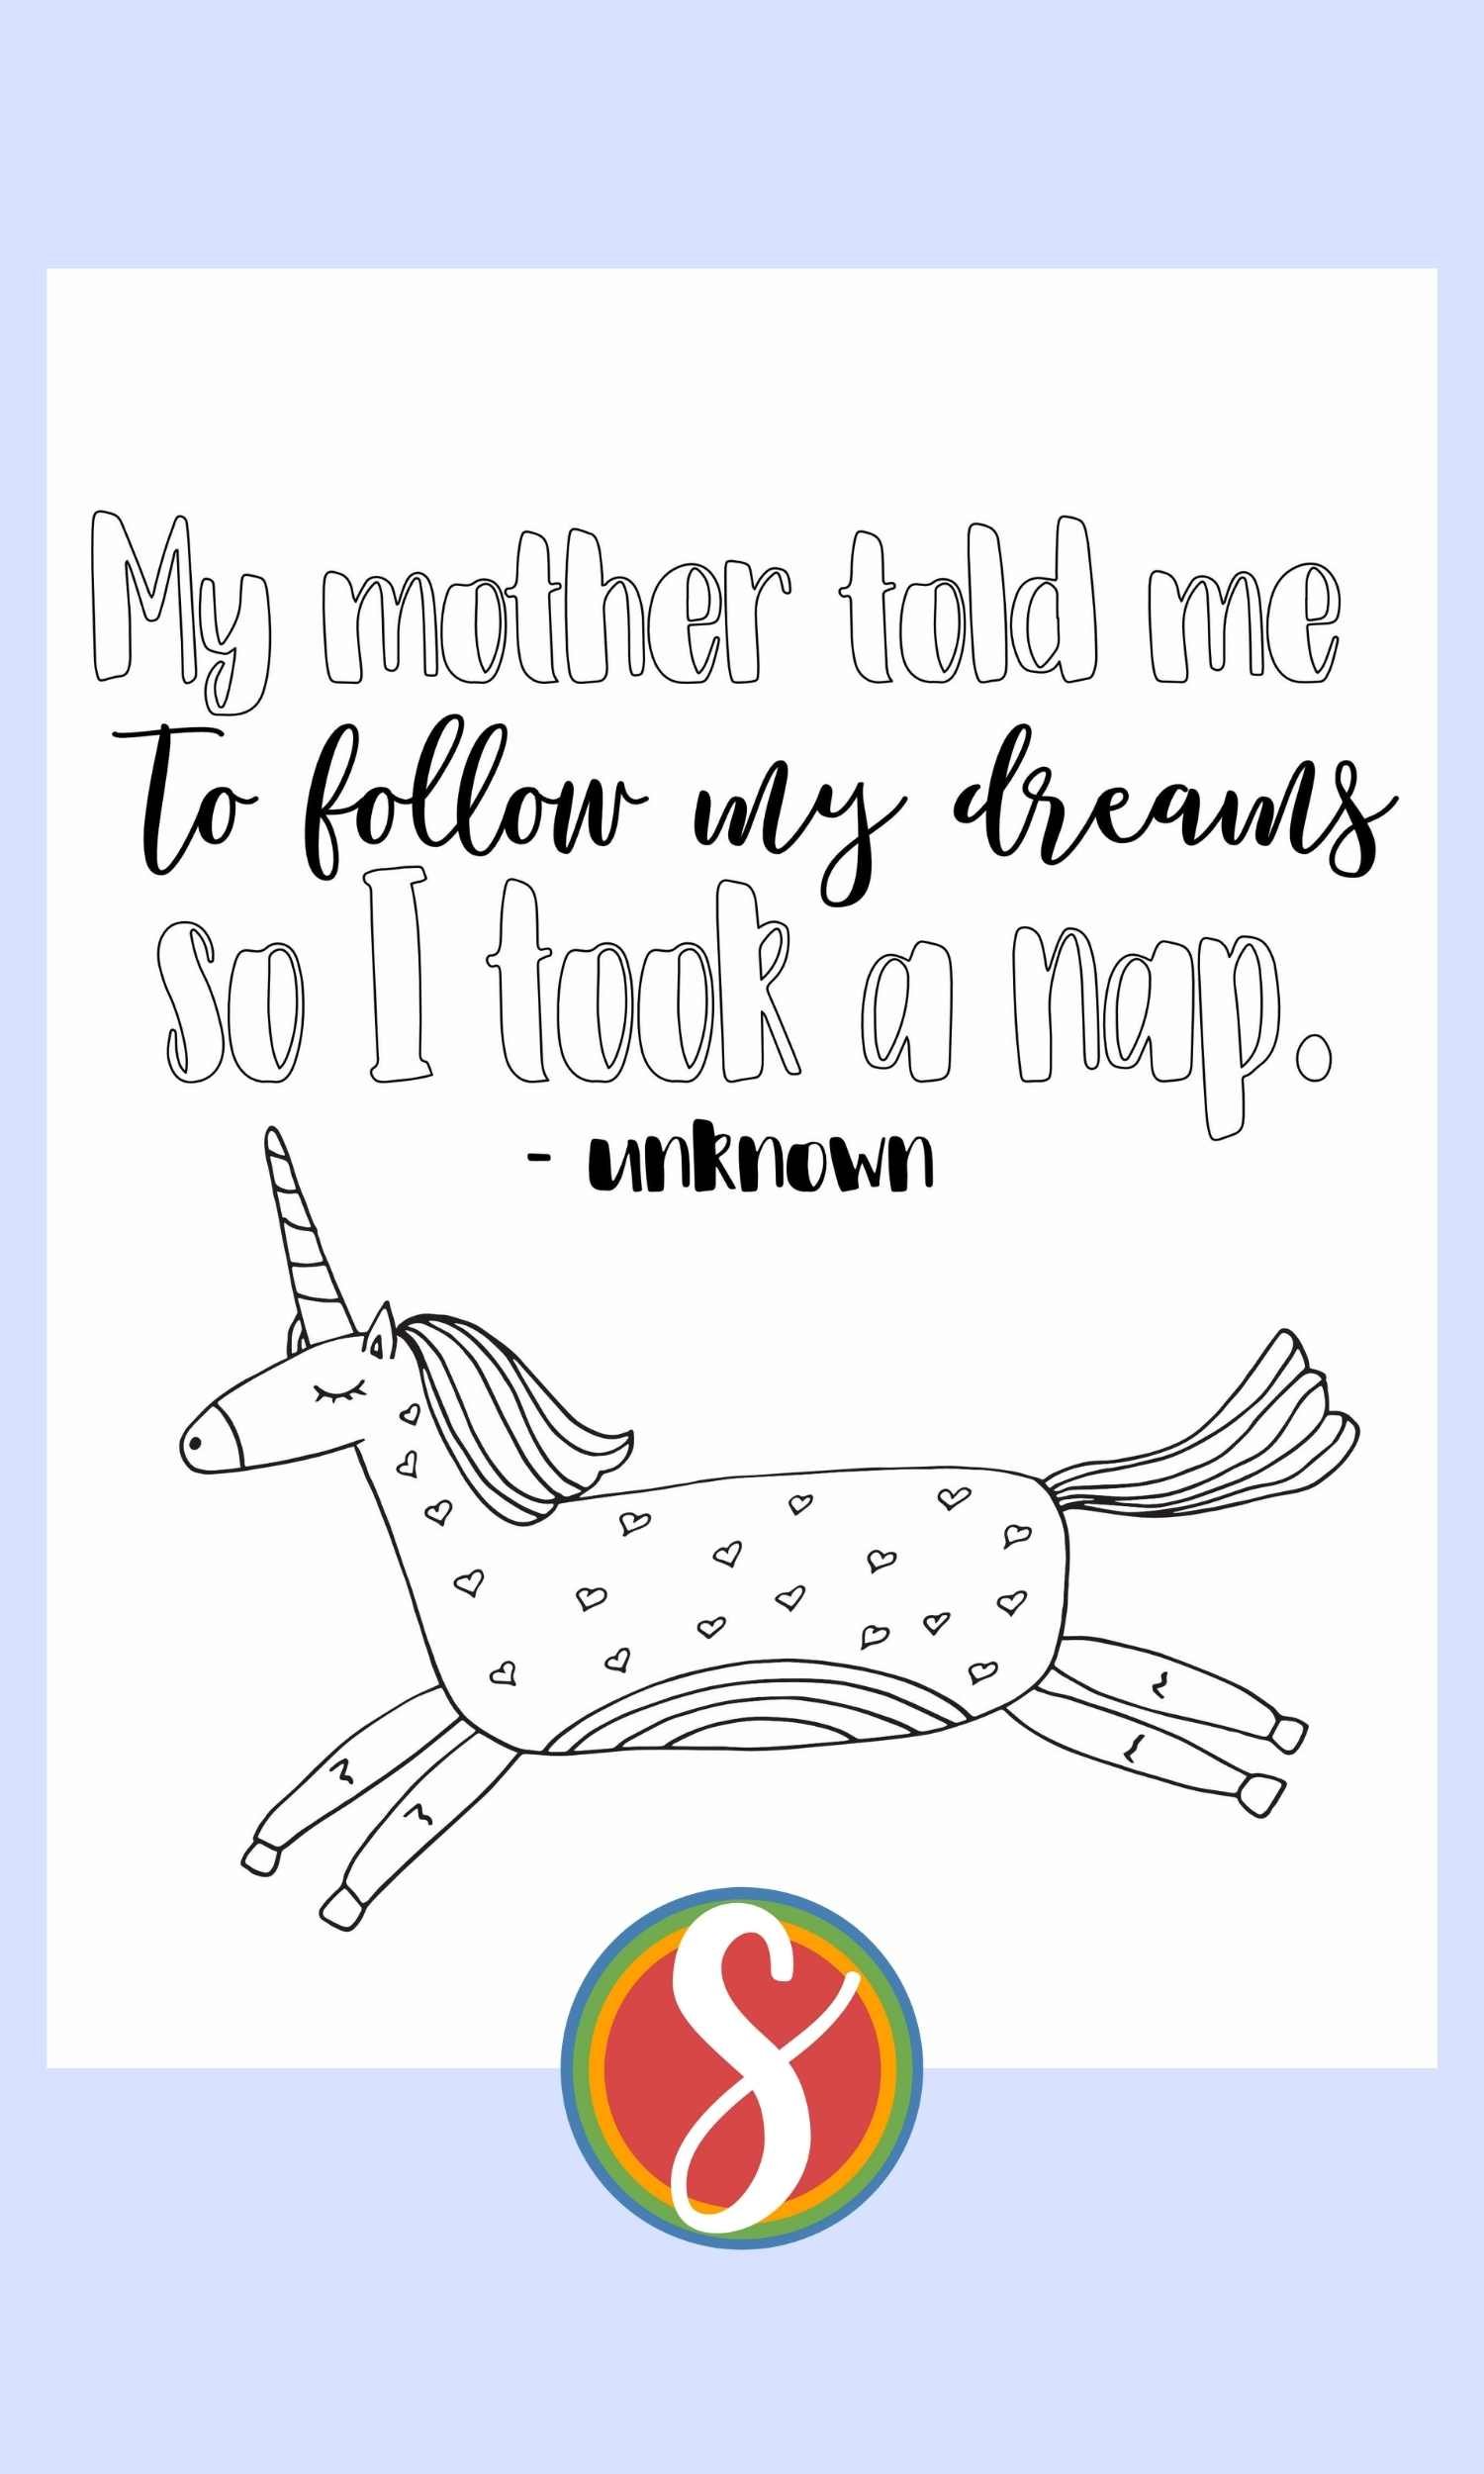 unicorn coloring page with simple unicorn with hearts on the body and colorable words "my mother told me to follow my dreams so I took a nap"